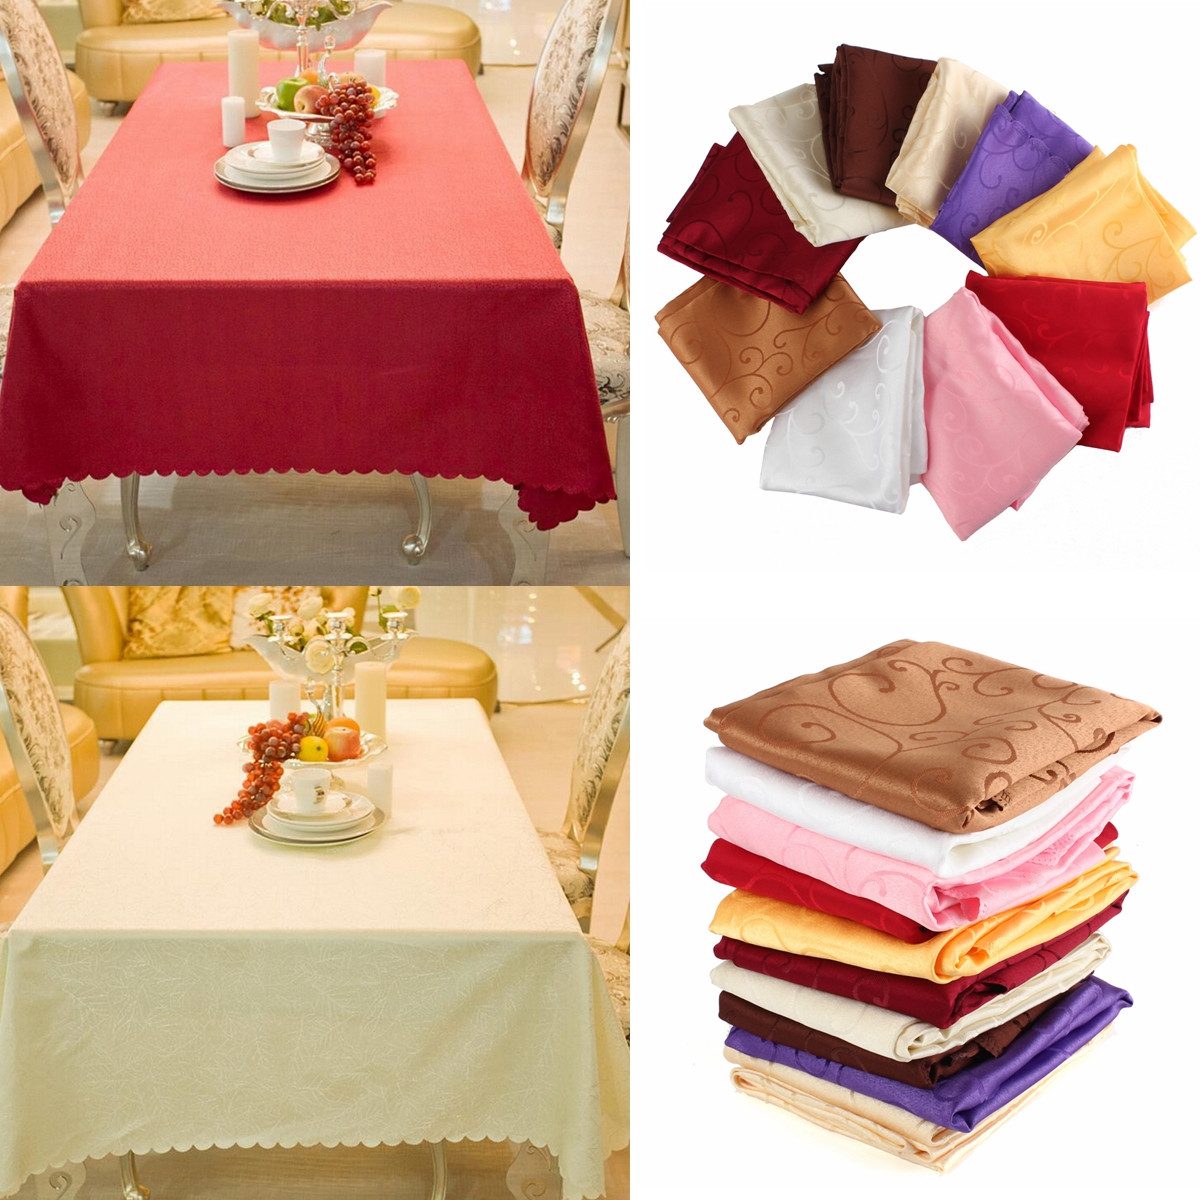 120cm-Polyester-Absorbent-Square-Tablecloth-For-Hotel-Restaurant-Wedding-Decor-1033358-1